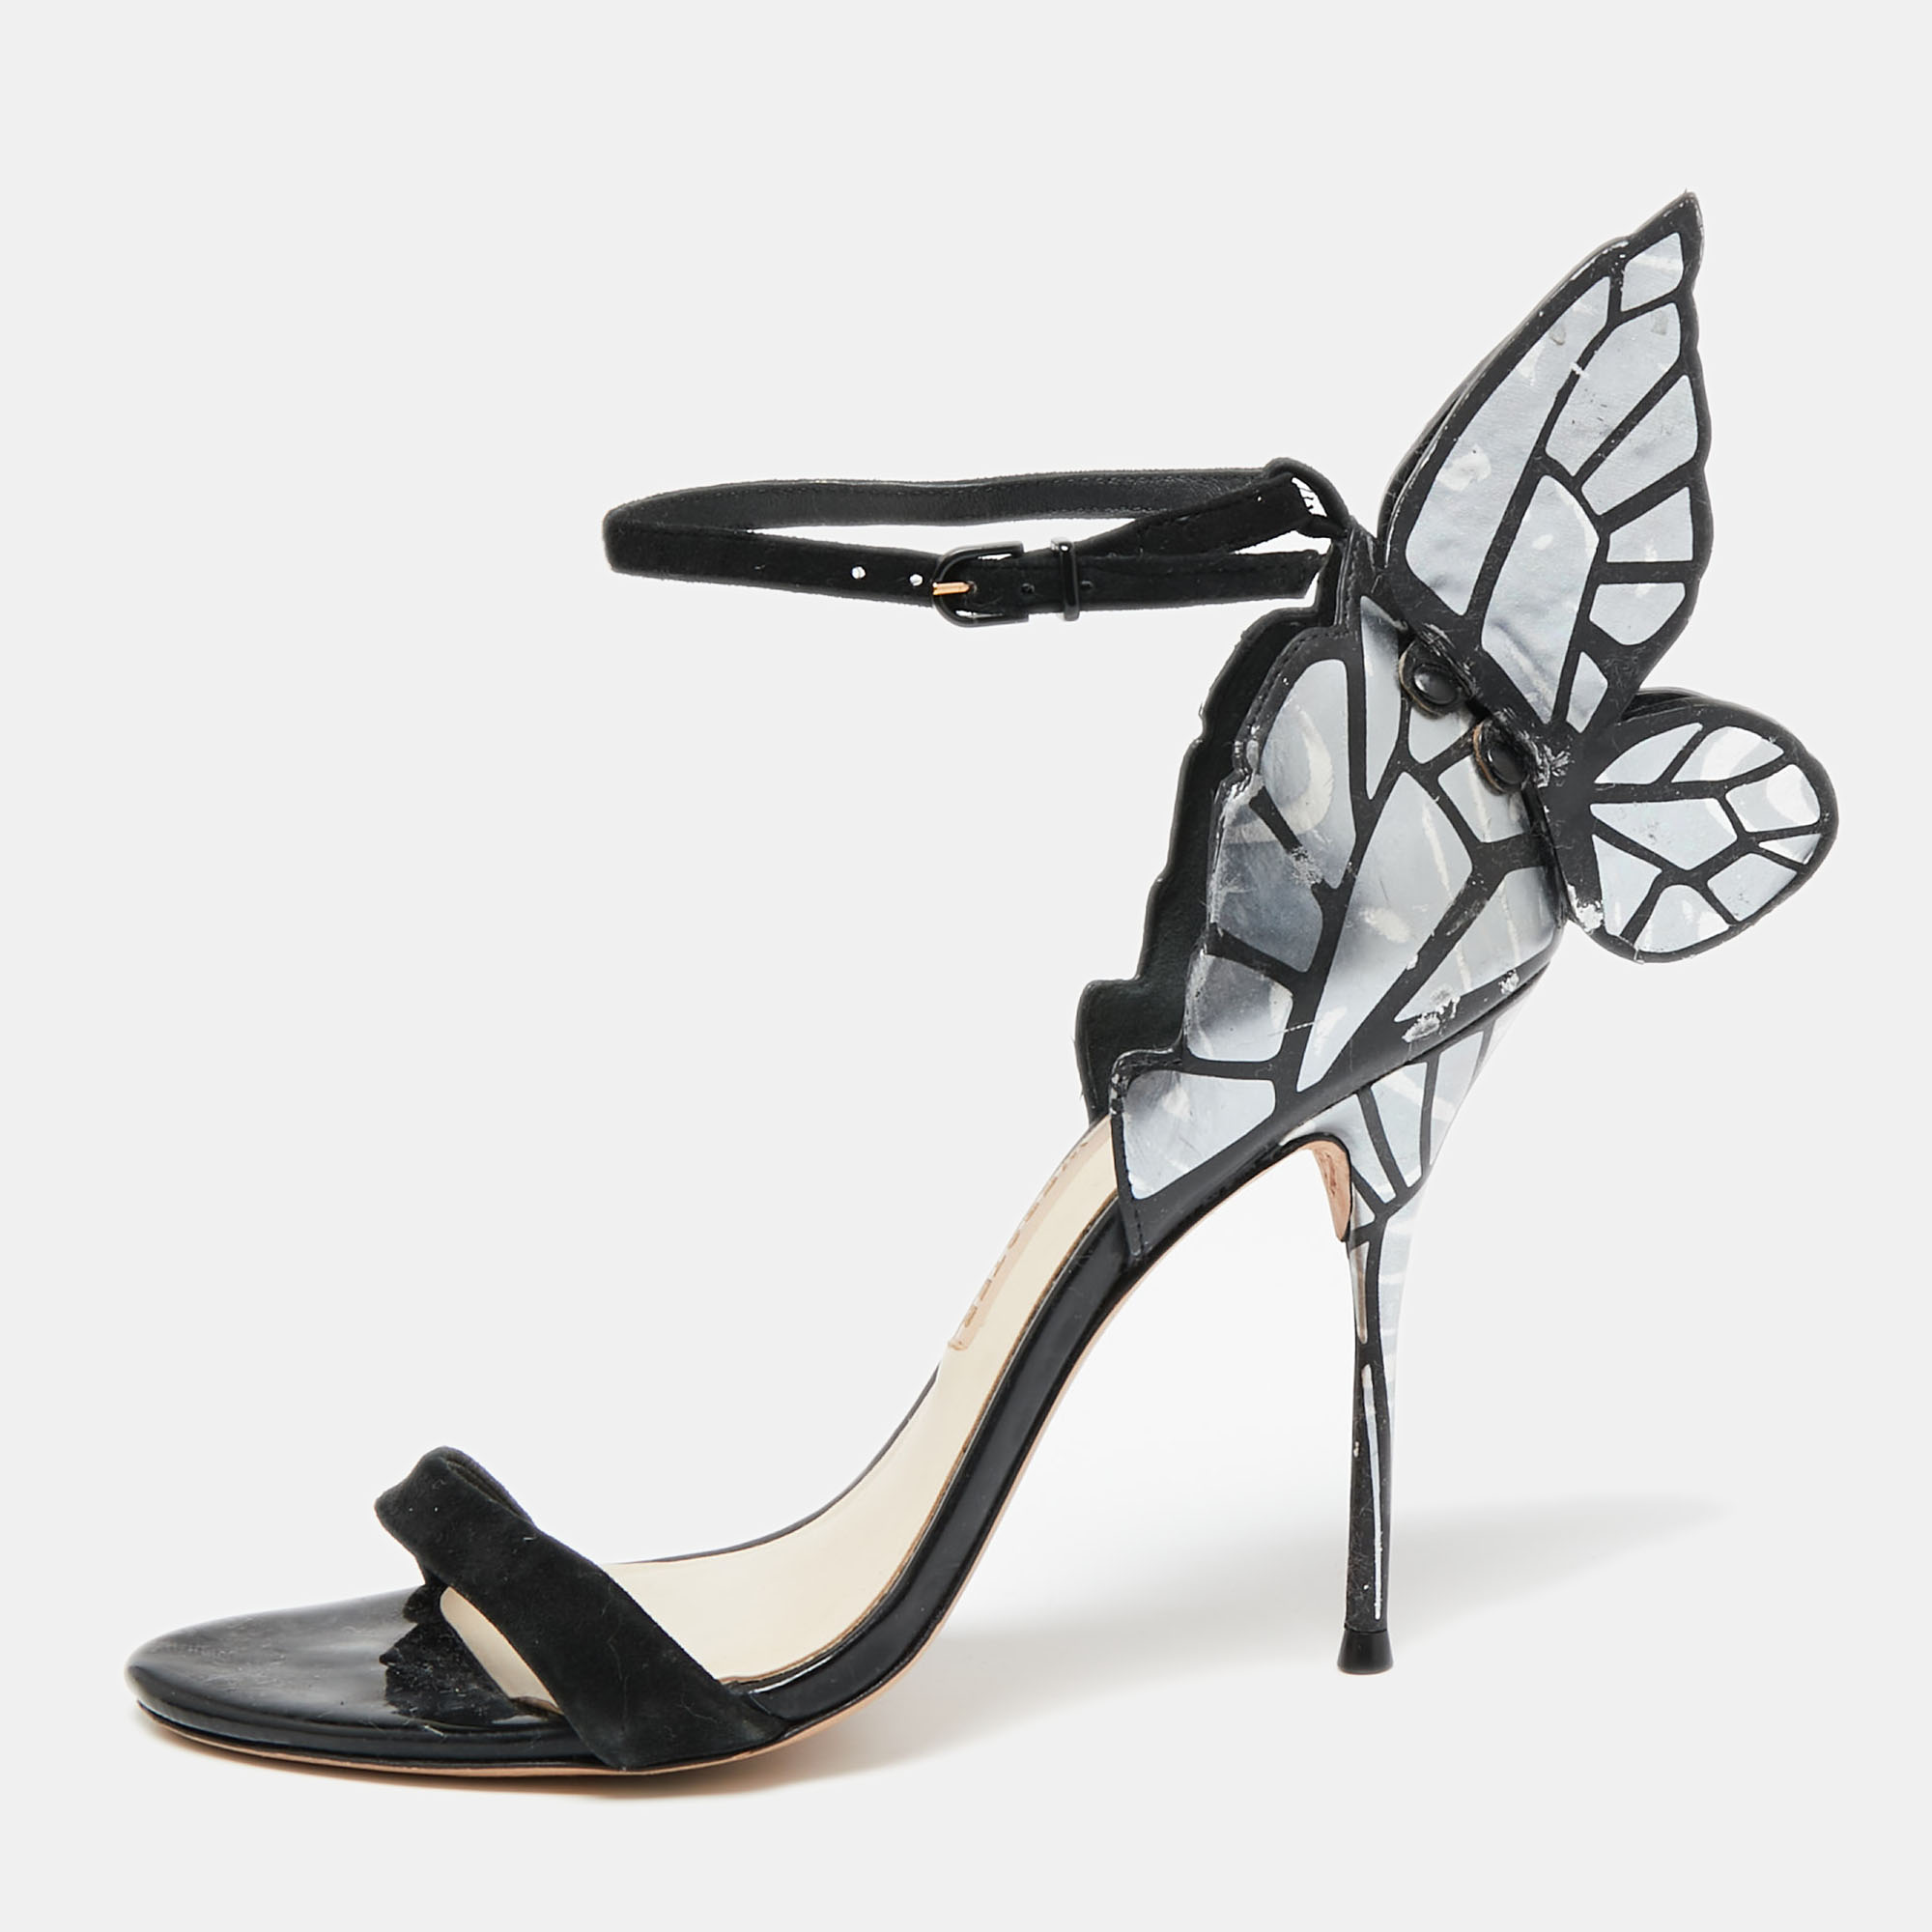 Sophia webster black/silver leather and suede chiara ankle-strap sandals size 38